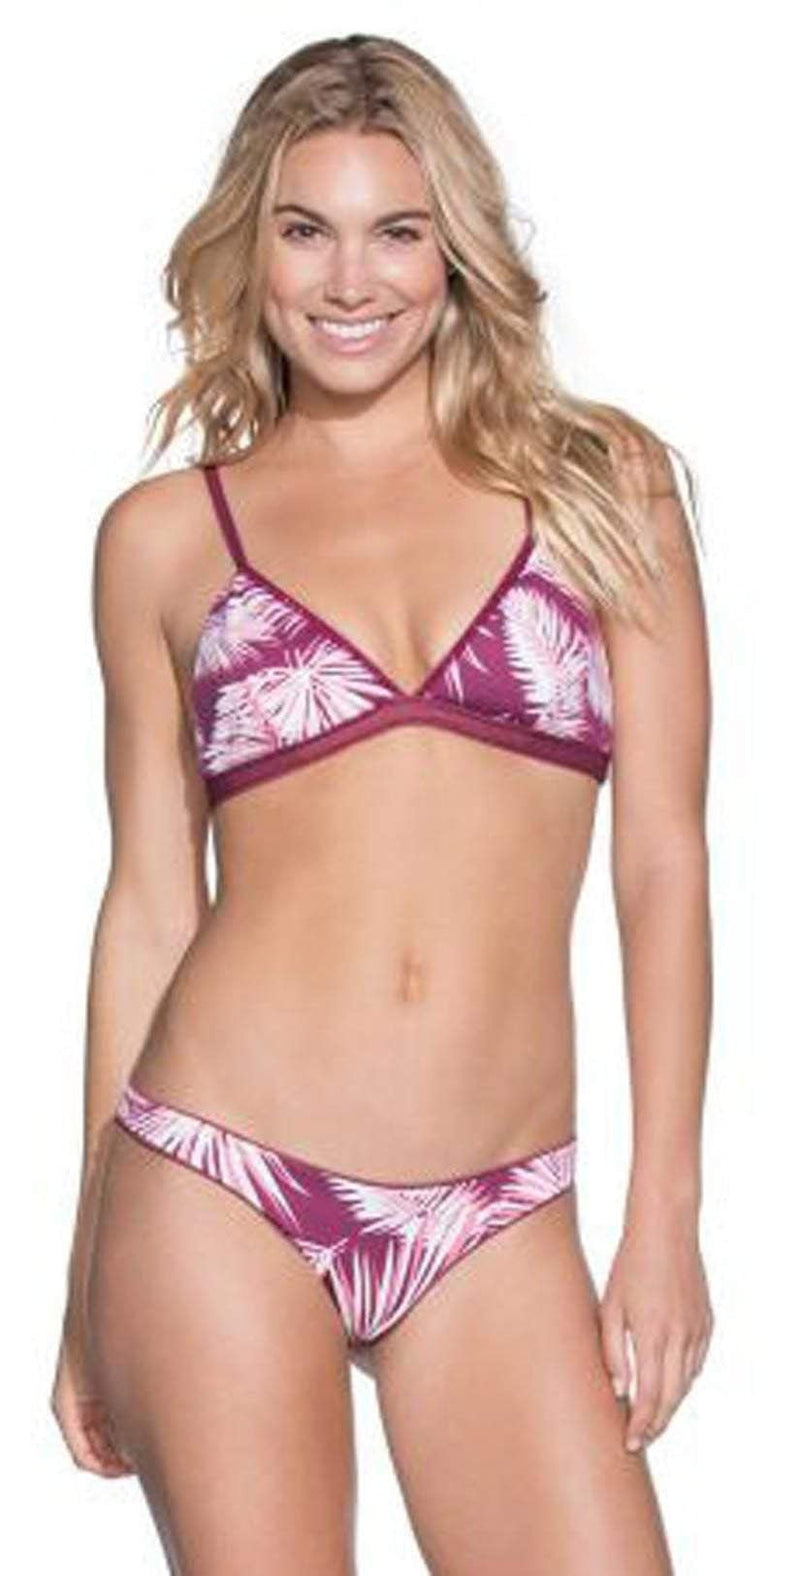 Victoria's Secret Ruched Hiphugger Purple Panties, X-Small